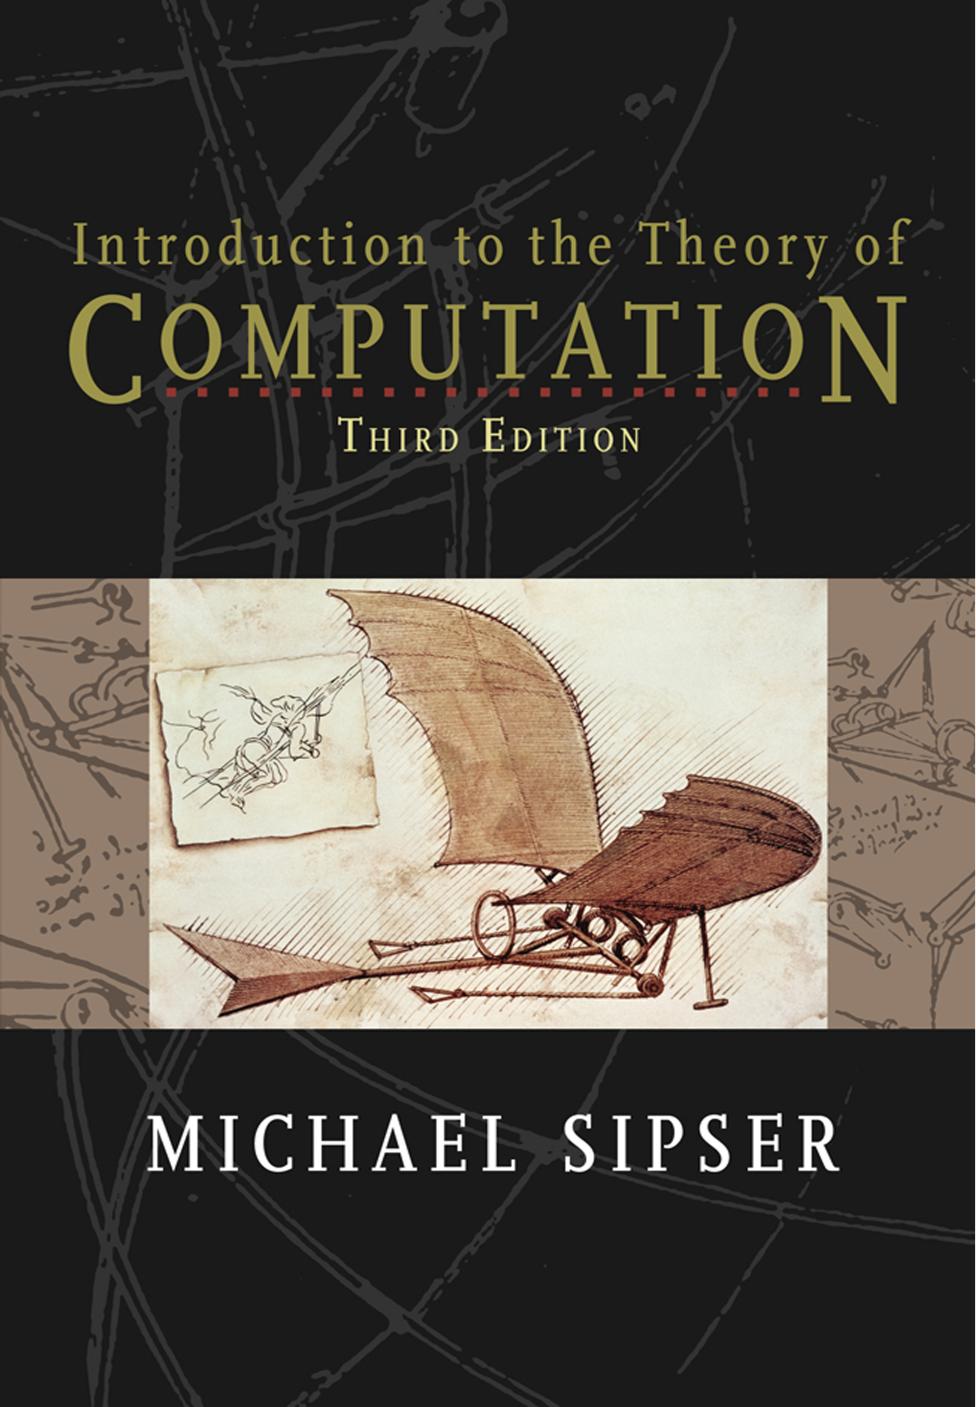 Introduction to the Theory of Computation, 3rd ed.